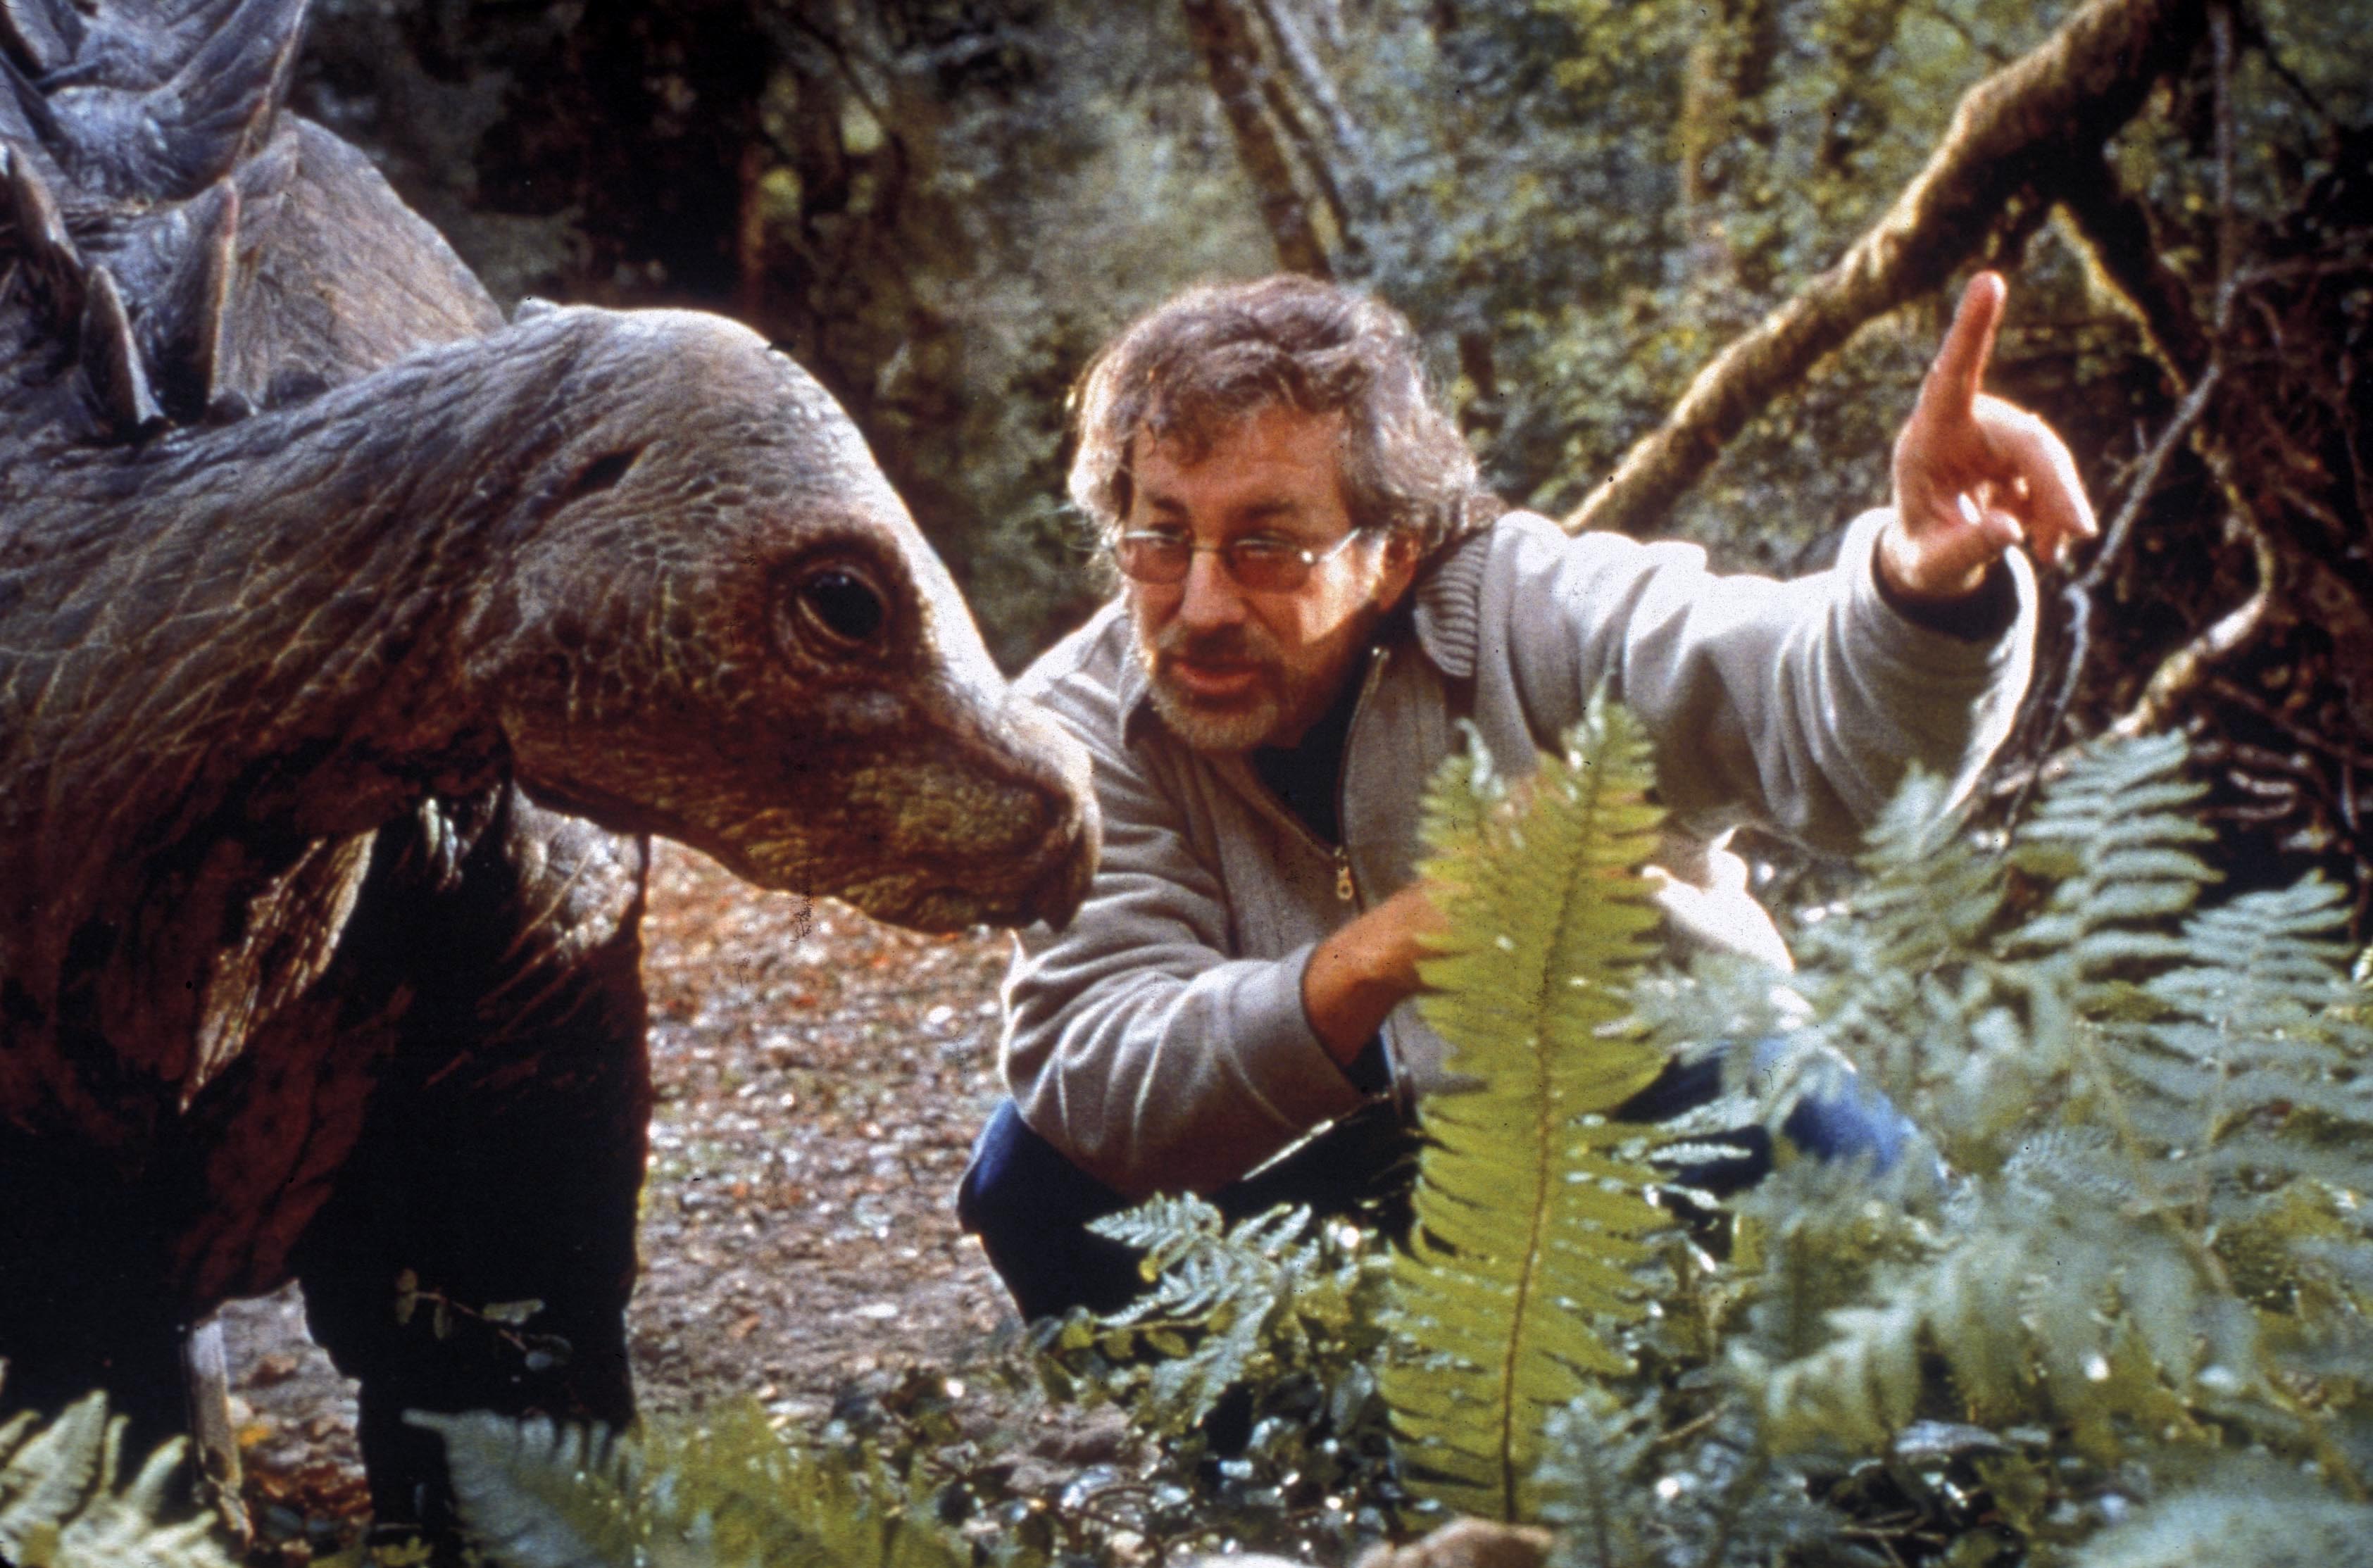 Steven Spielberg behind the camera on set of ‘The Jurassic Park: Lost World’ in 1997